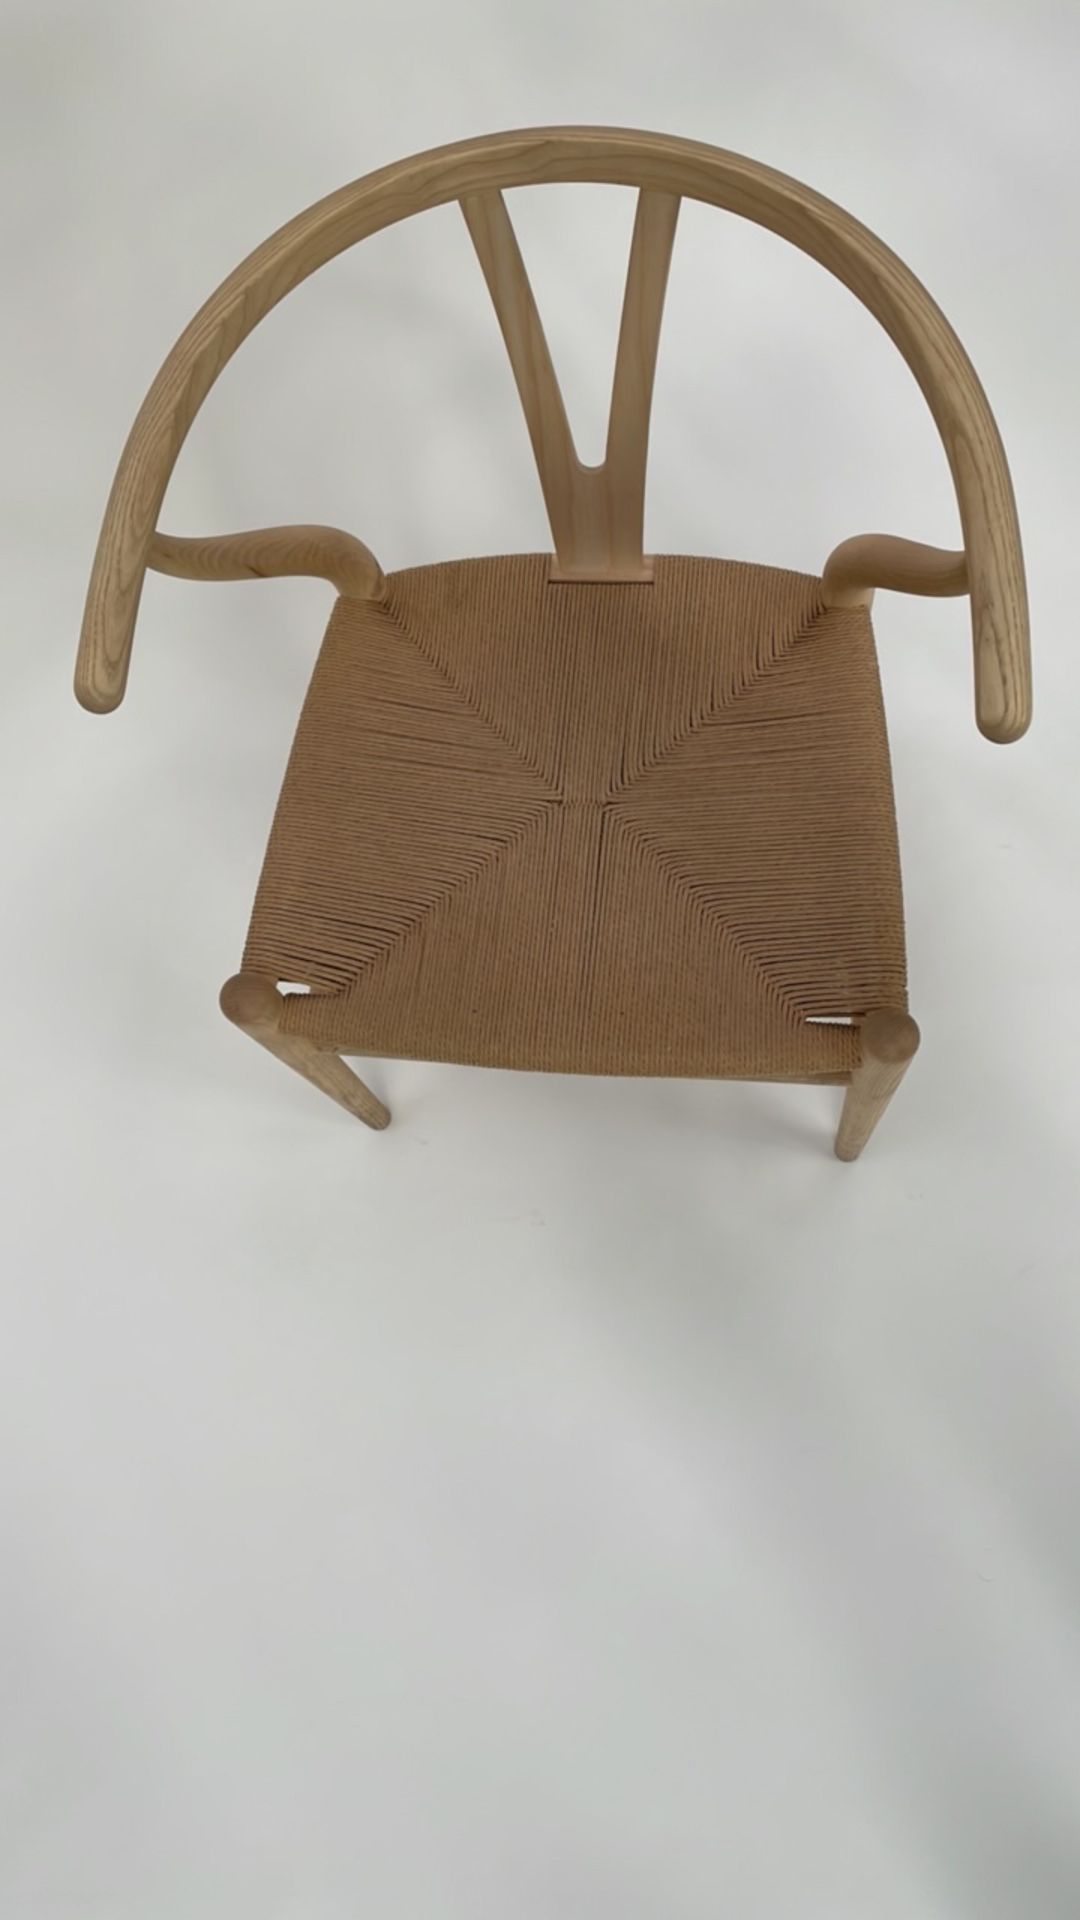 Carl Hansen and son chair - Image 3 of 3